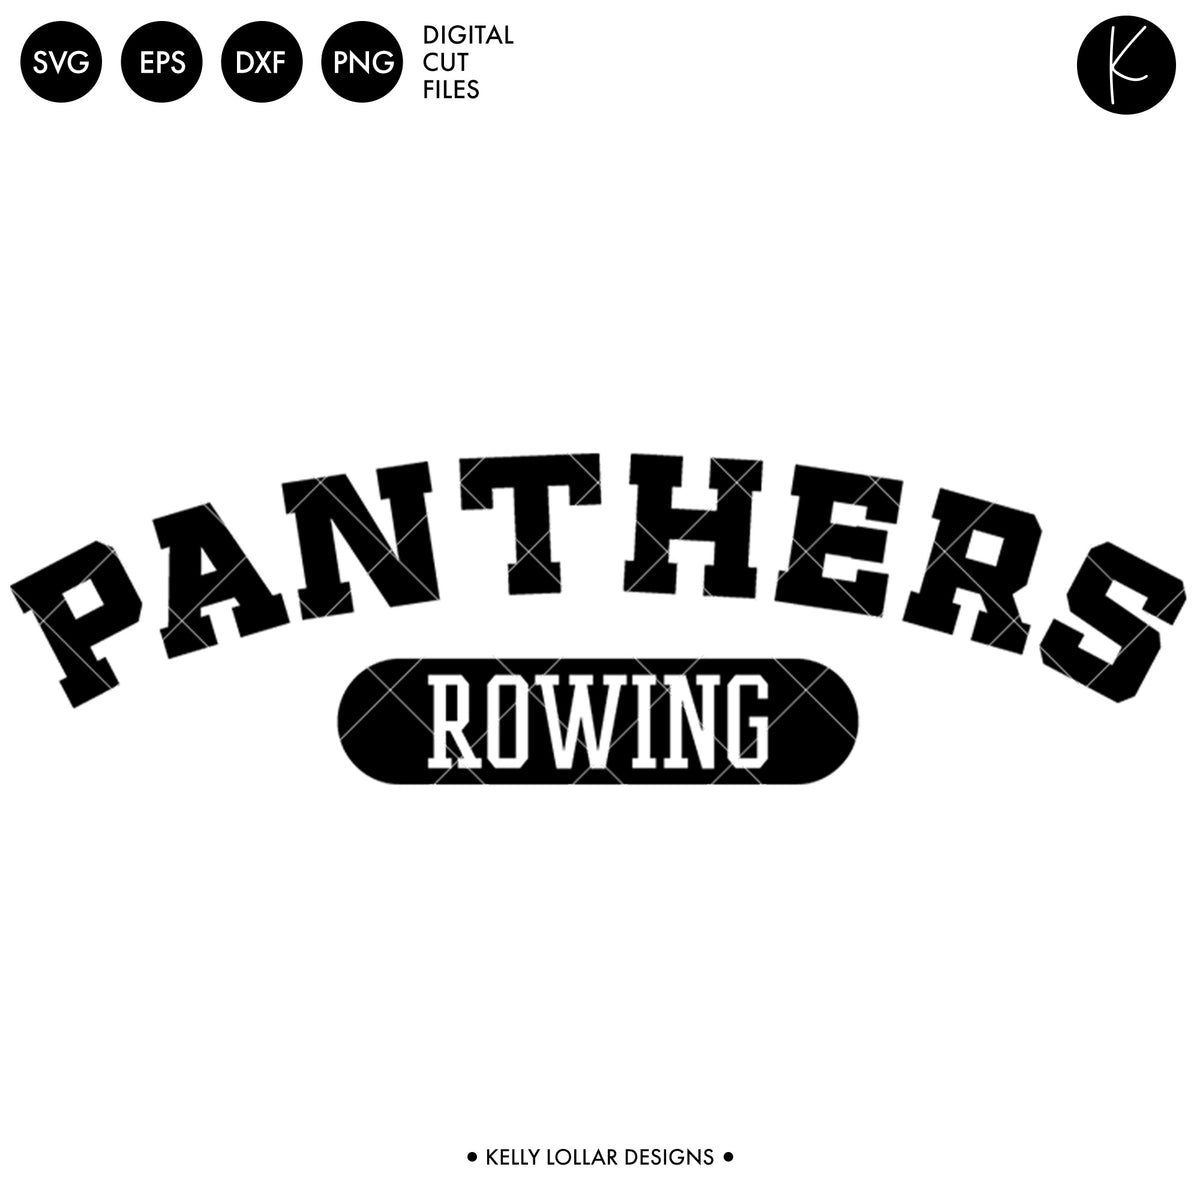 Panthers Rowing Crew Bundle | SVG DXF EPS PNG Cut Files